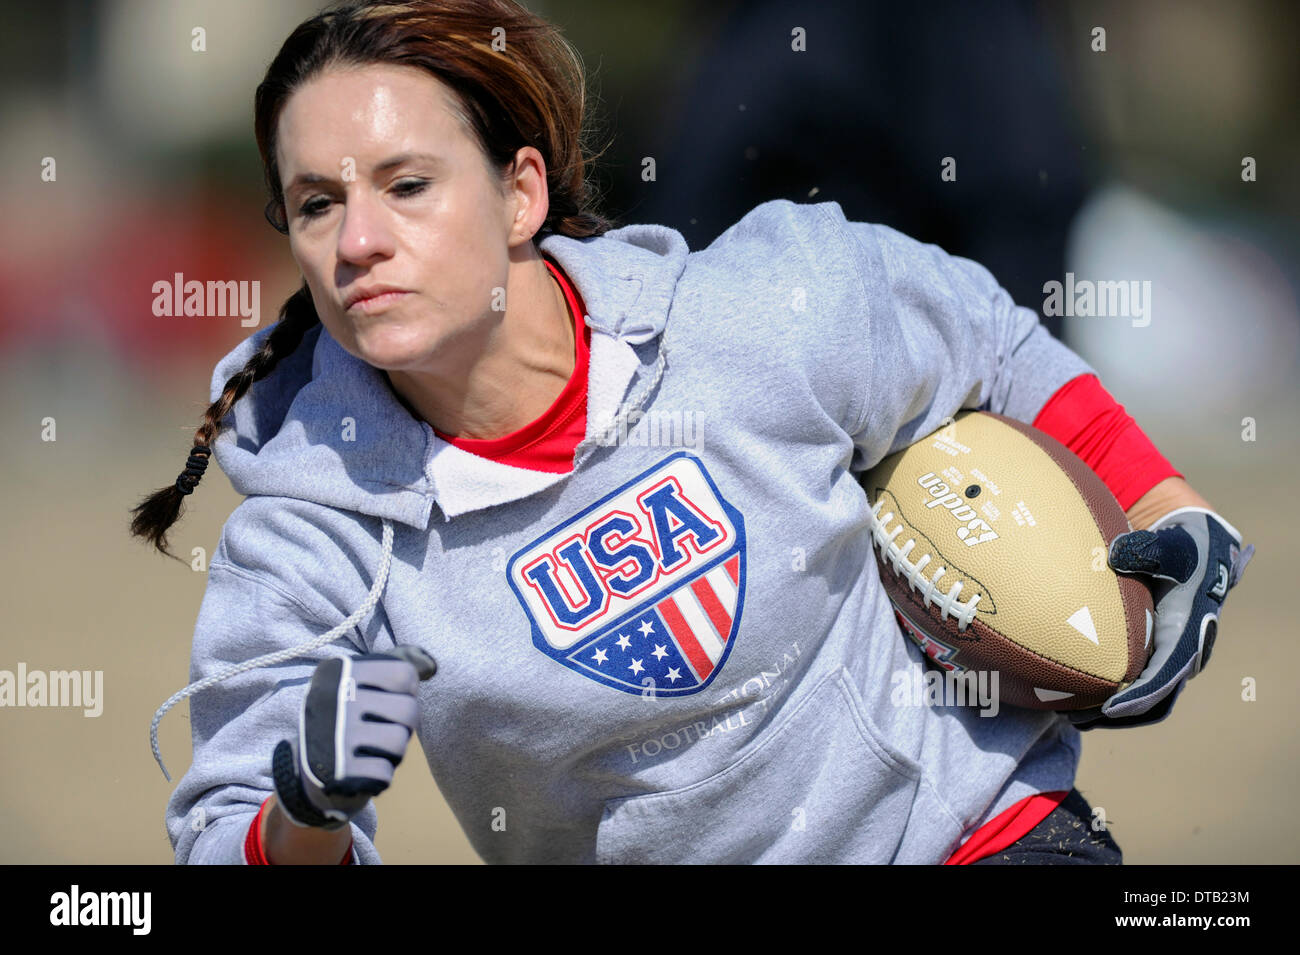 Feb. 13, 2014 - Allen, TX, United States of America - Jennifer Welter participates in a drill during practice Thursday, February 13, 2014, in Allen, Texas. The 5-foot-2-inch, 130 pound Welter is the first woman to try out for a professional football team at a position other than kicker, she is trying to make the Texas Revolution of the Arena Football League, as a running back. Stock Photo